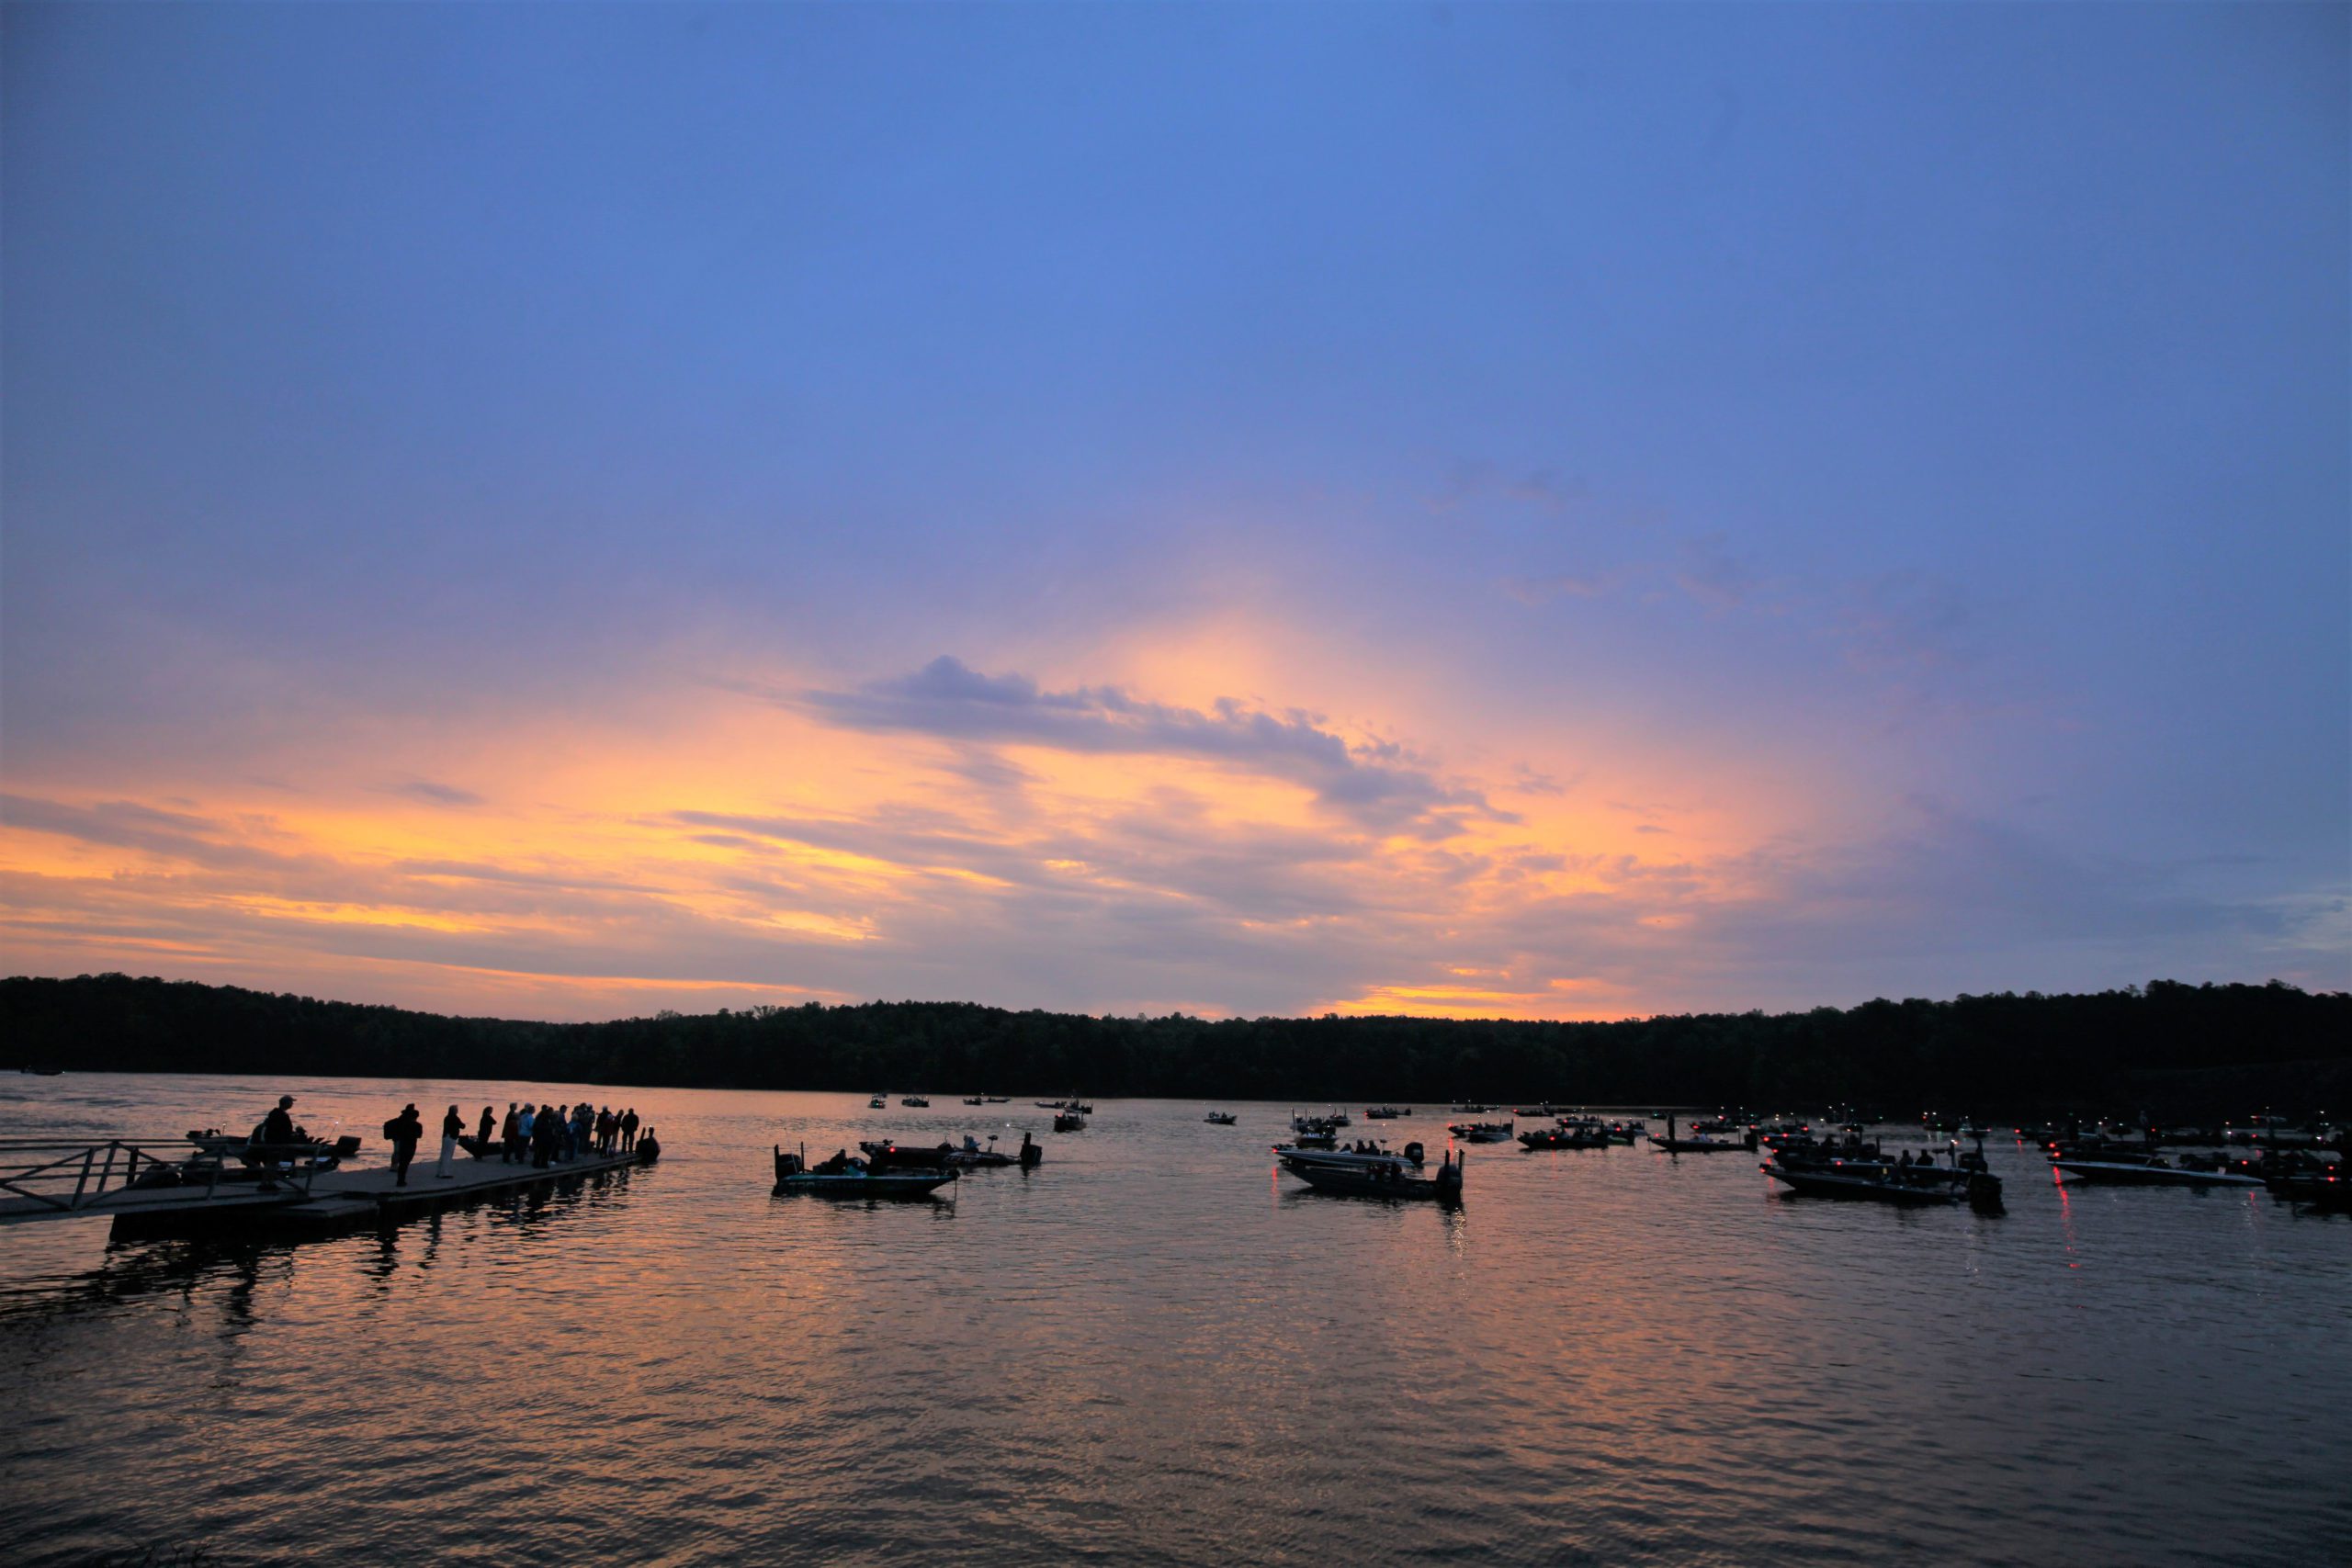 Recent Storms, High Water Could Play A Role In Bassmaster Central Open At Lewis Smith Lake